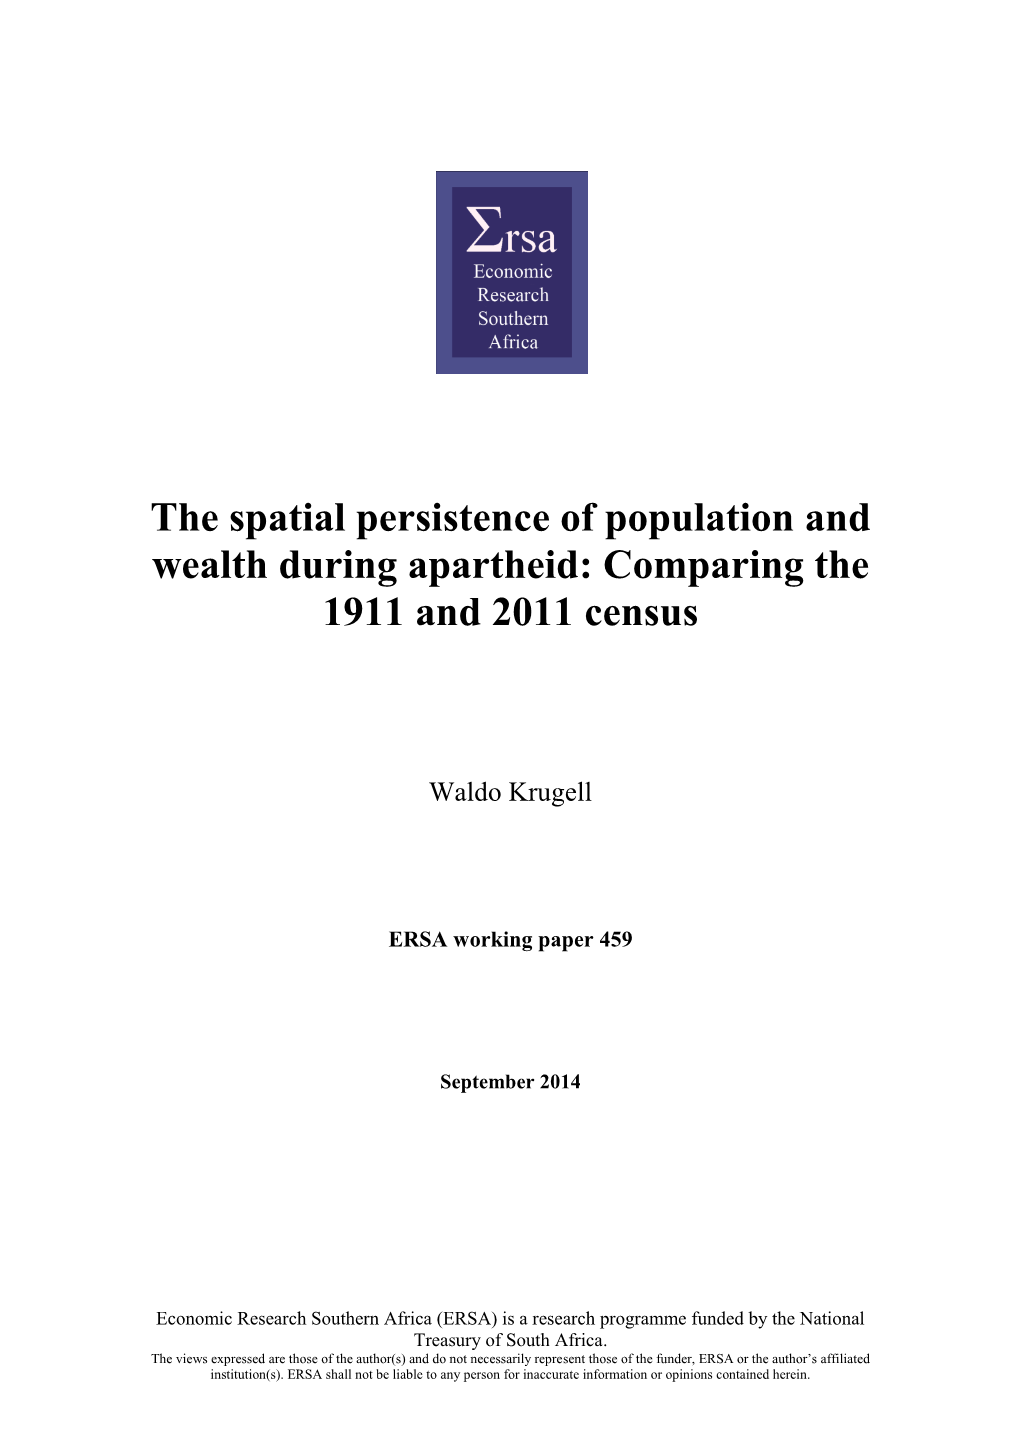 The Spatial Persistence of Population and Wealth During Apartheid: Comparing the 1911 and 2011 Census